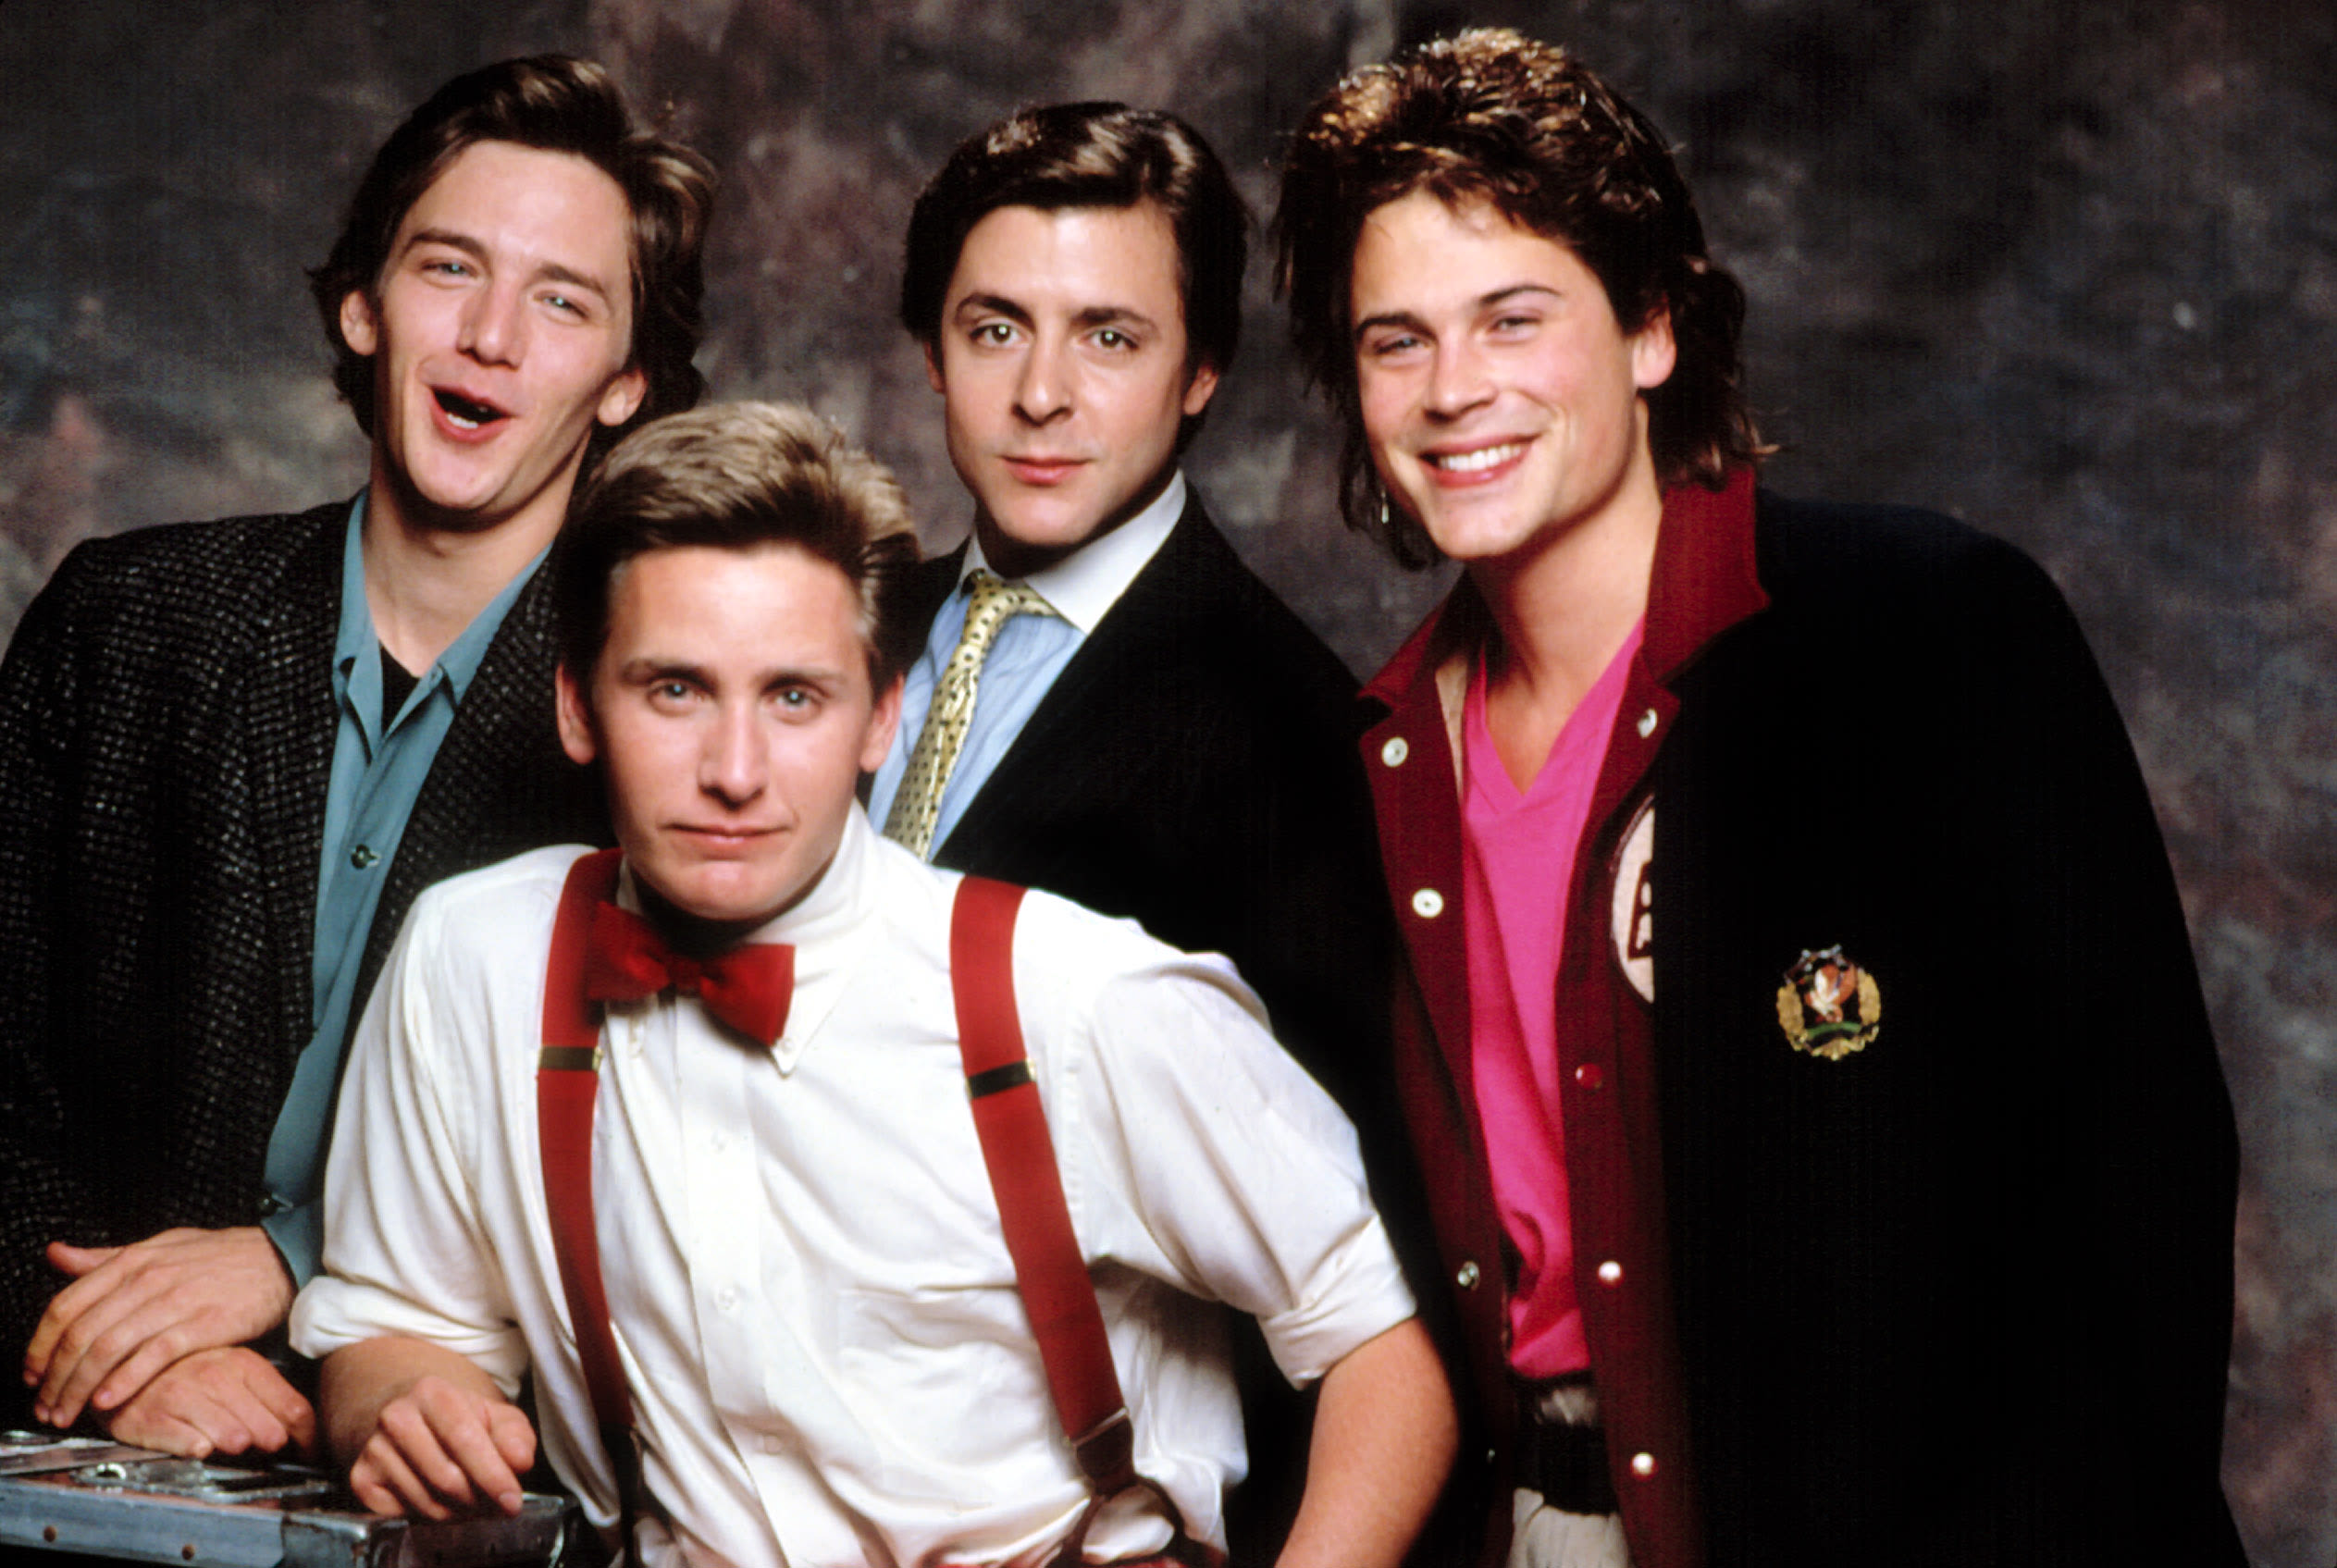 ‘St. Elmo’s Fire’ Sequel in ‘Very Early Stages’ of Development, Says Rob Lowe: ‘We’ve Met With the Studio’